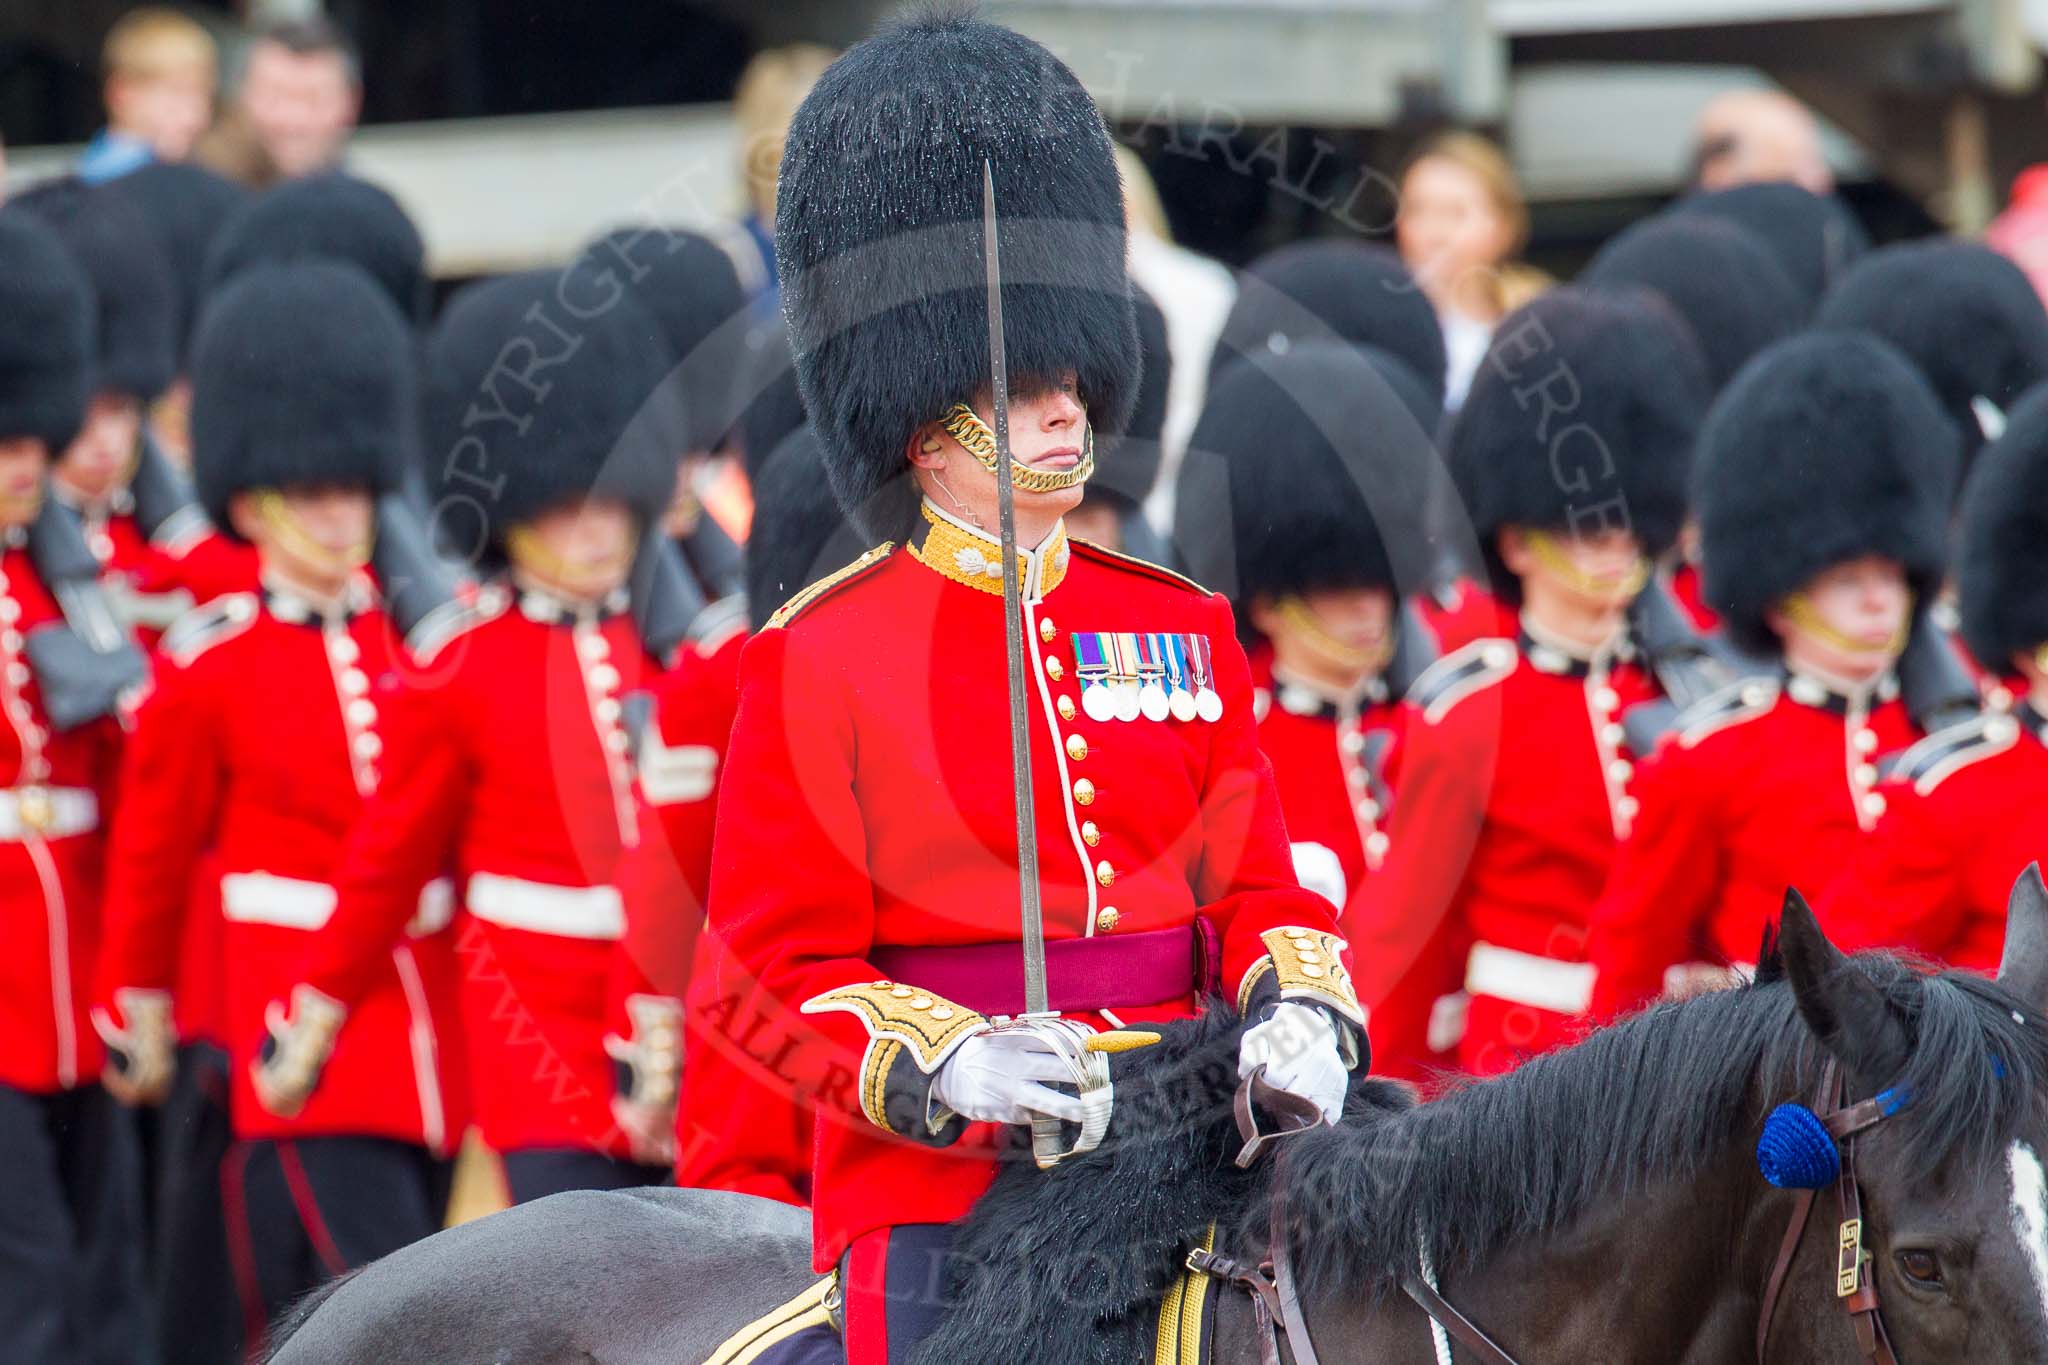 The Colonel's Review 2014.
Horse Guards Parade, Westminster,
London,

United Kingdom,
on 07 June 2014 at 11:43, image #542